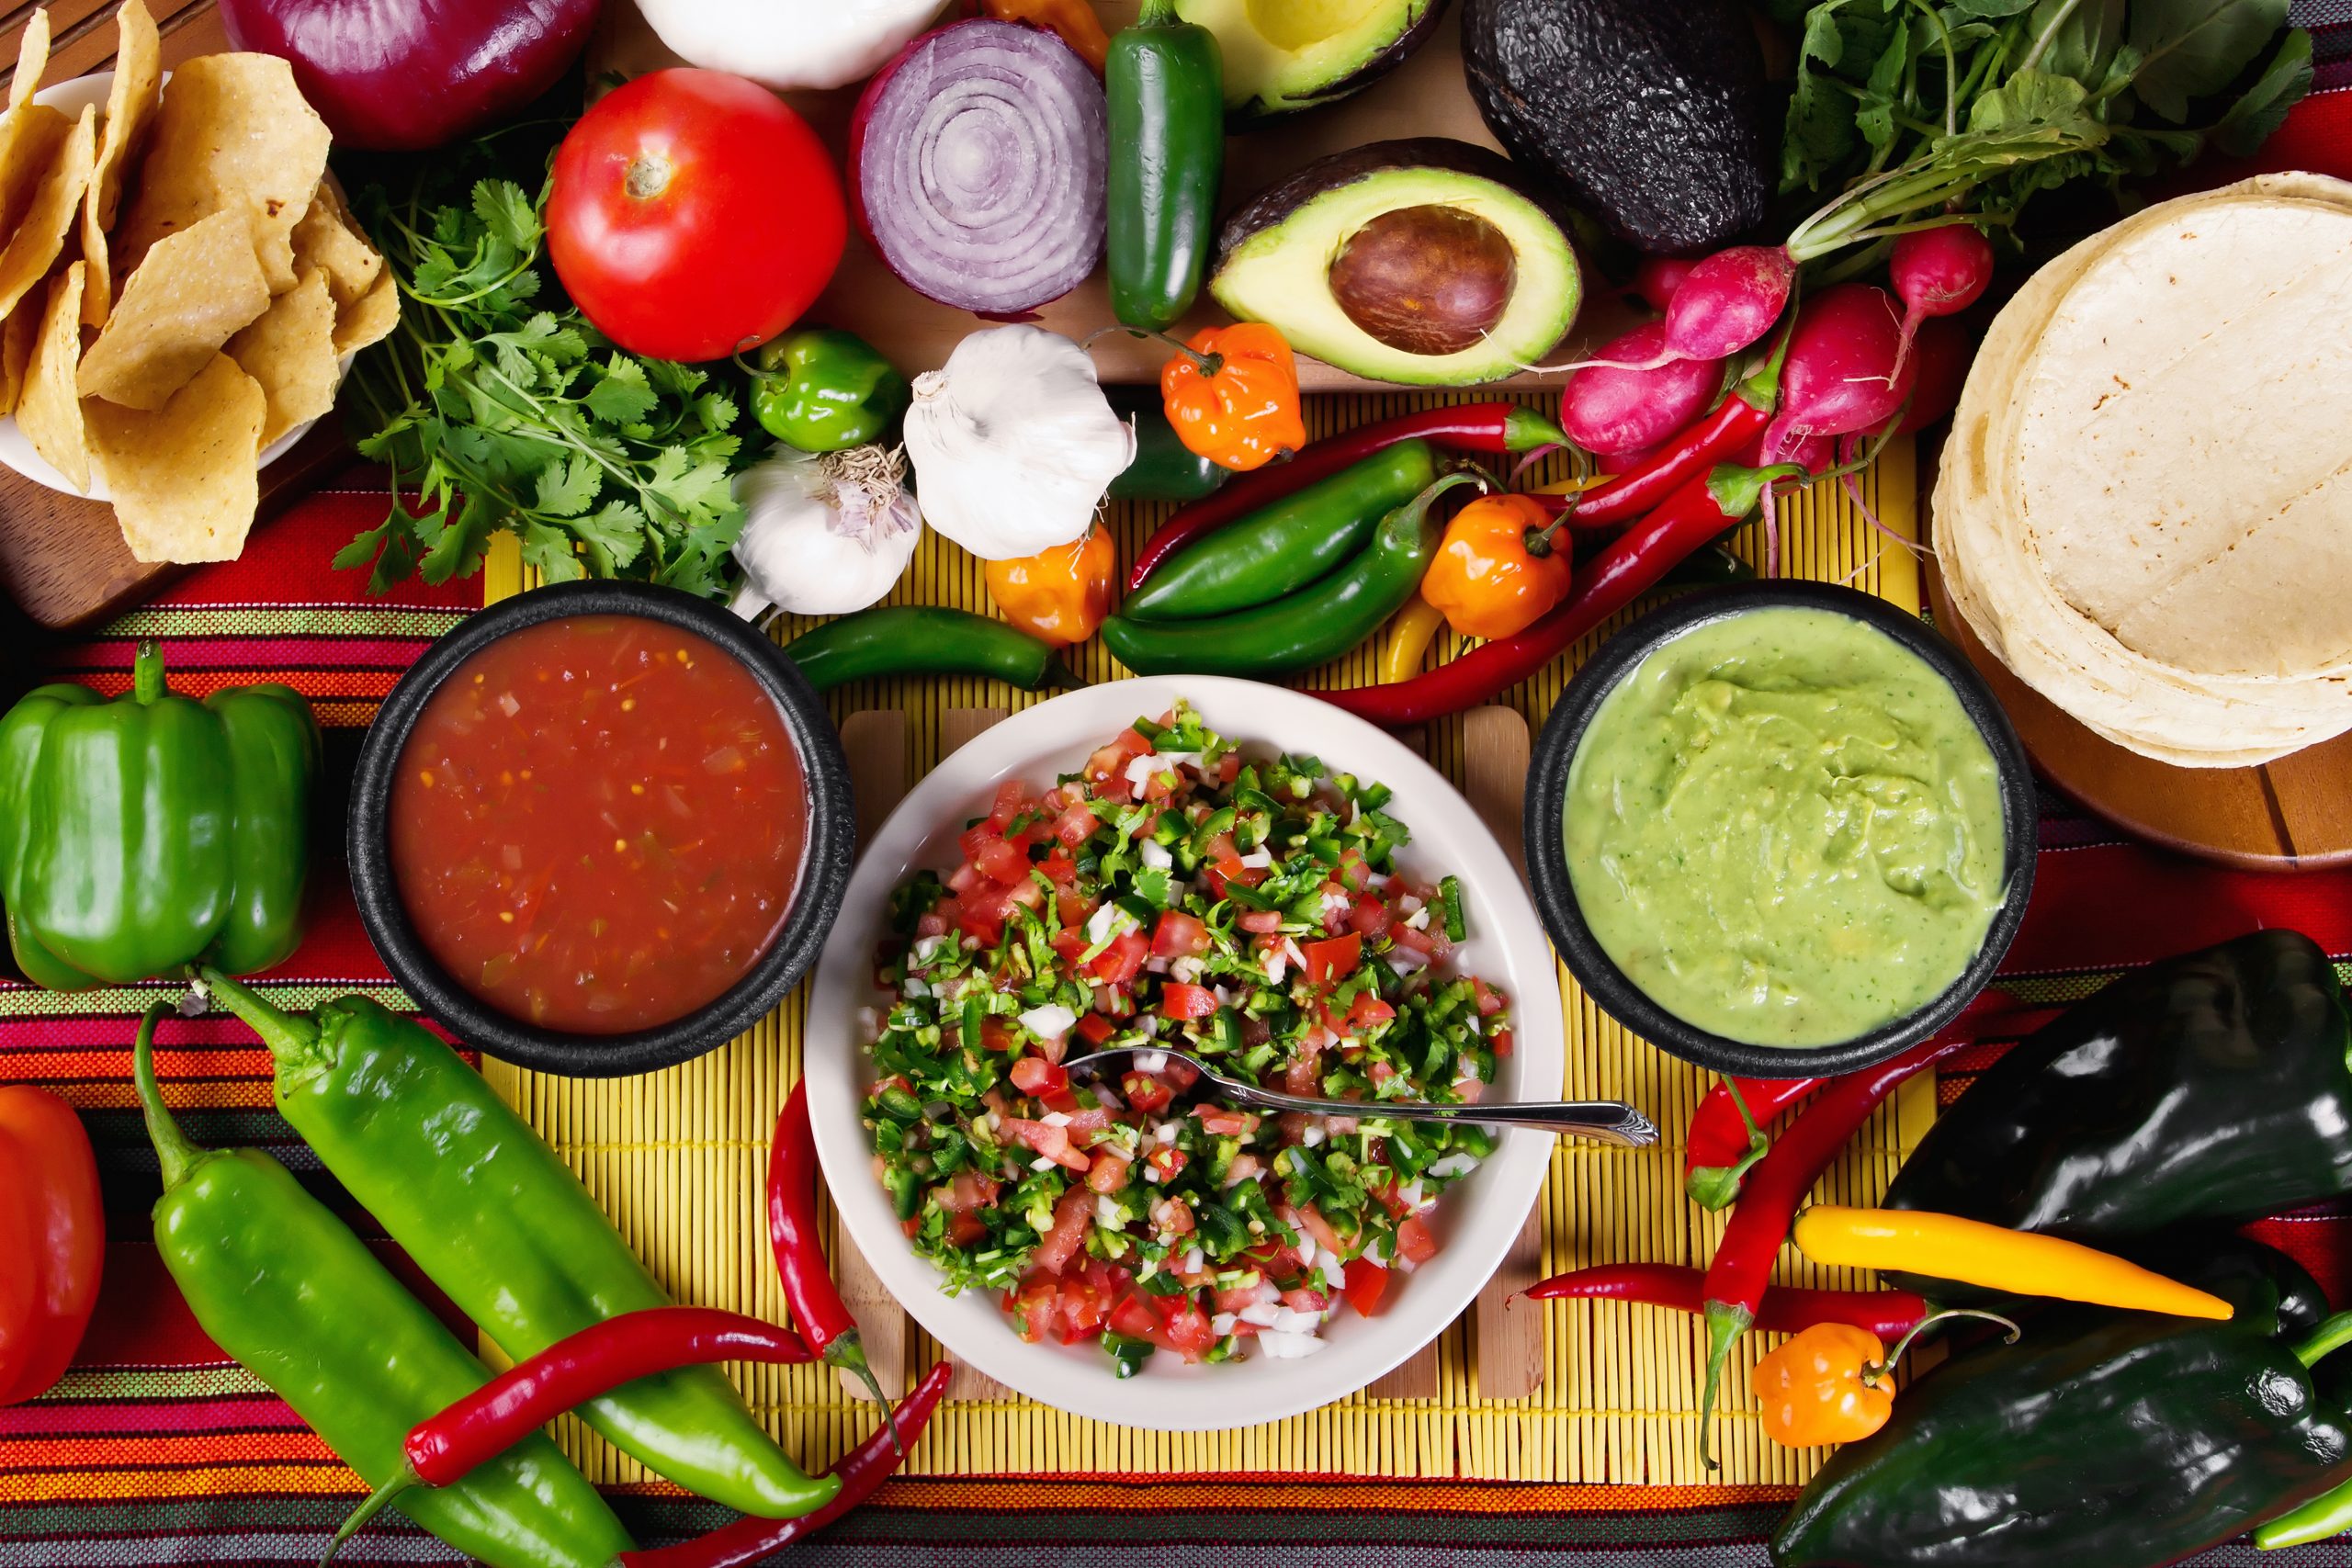 WIN a HUGE Cocina Mexicana hamper for you and your bestie